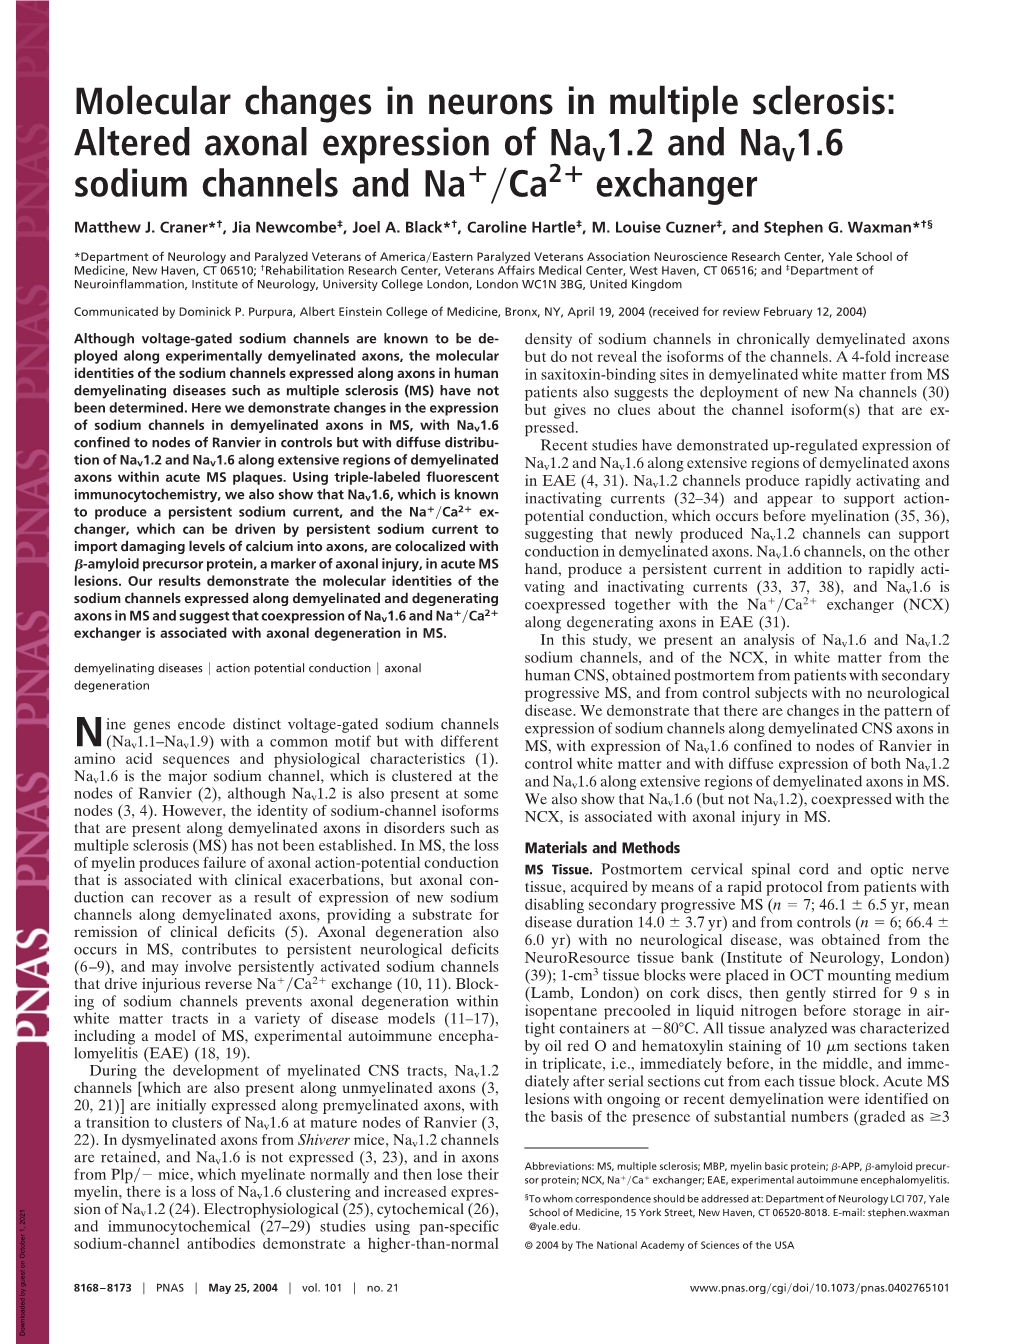 Molecular Changes in Neurons in Multiple Sclerosis: Altered Axonal Expression of Nav1.2 and Nav1.6 Sodium Channels and Na Ca